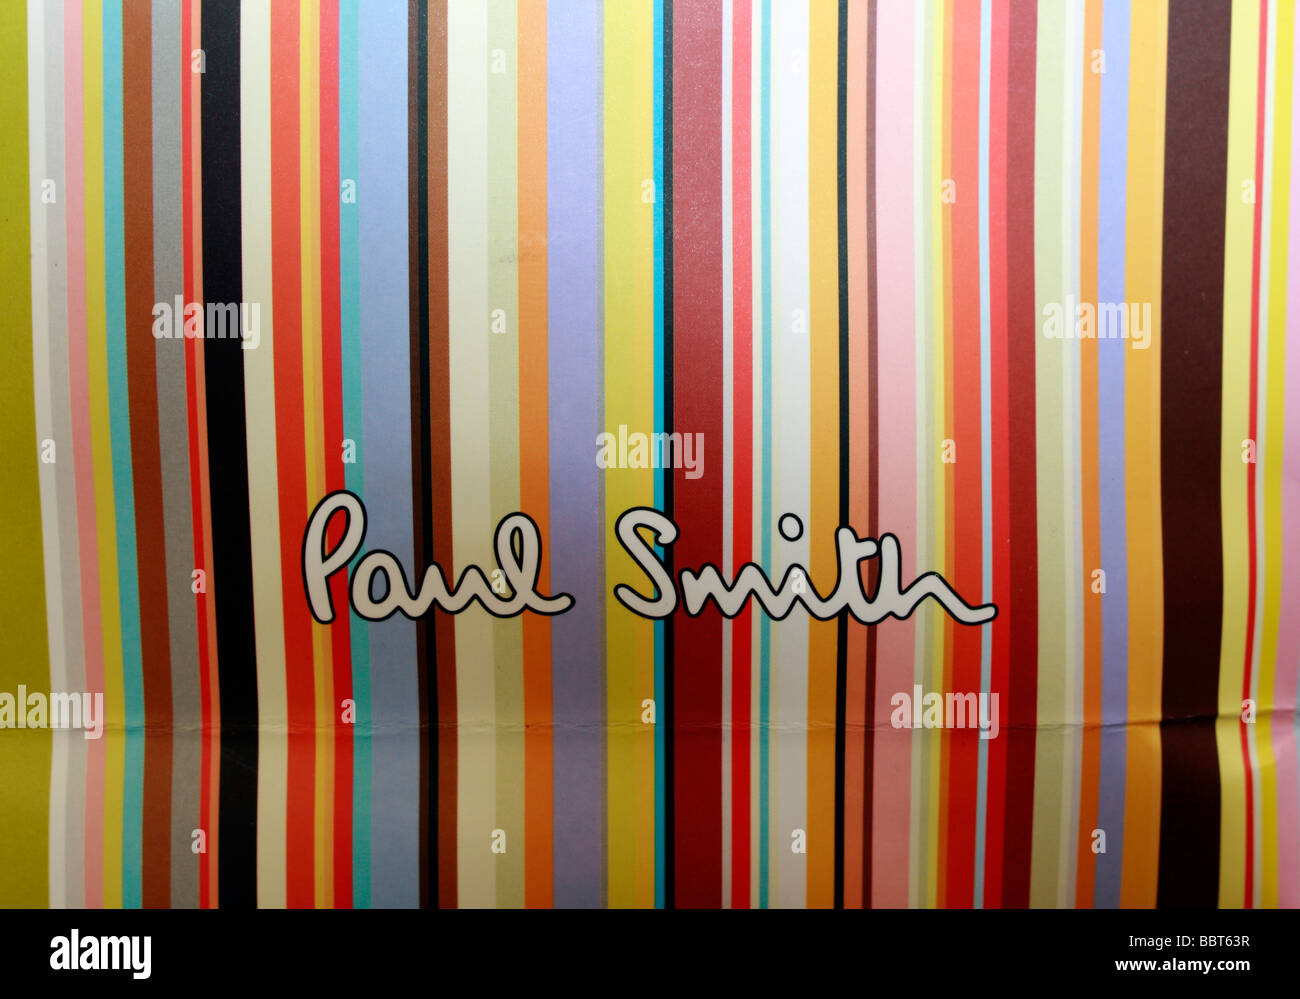 the Paul Smith label on a carrier bag along with the characteristic